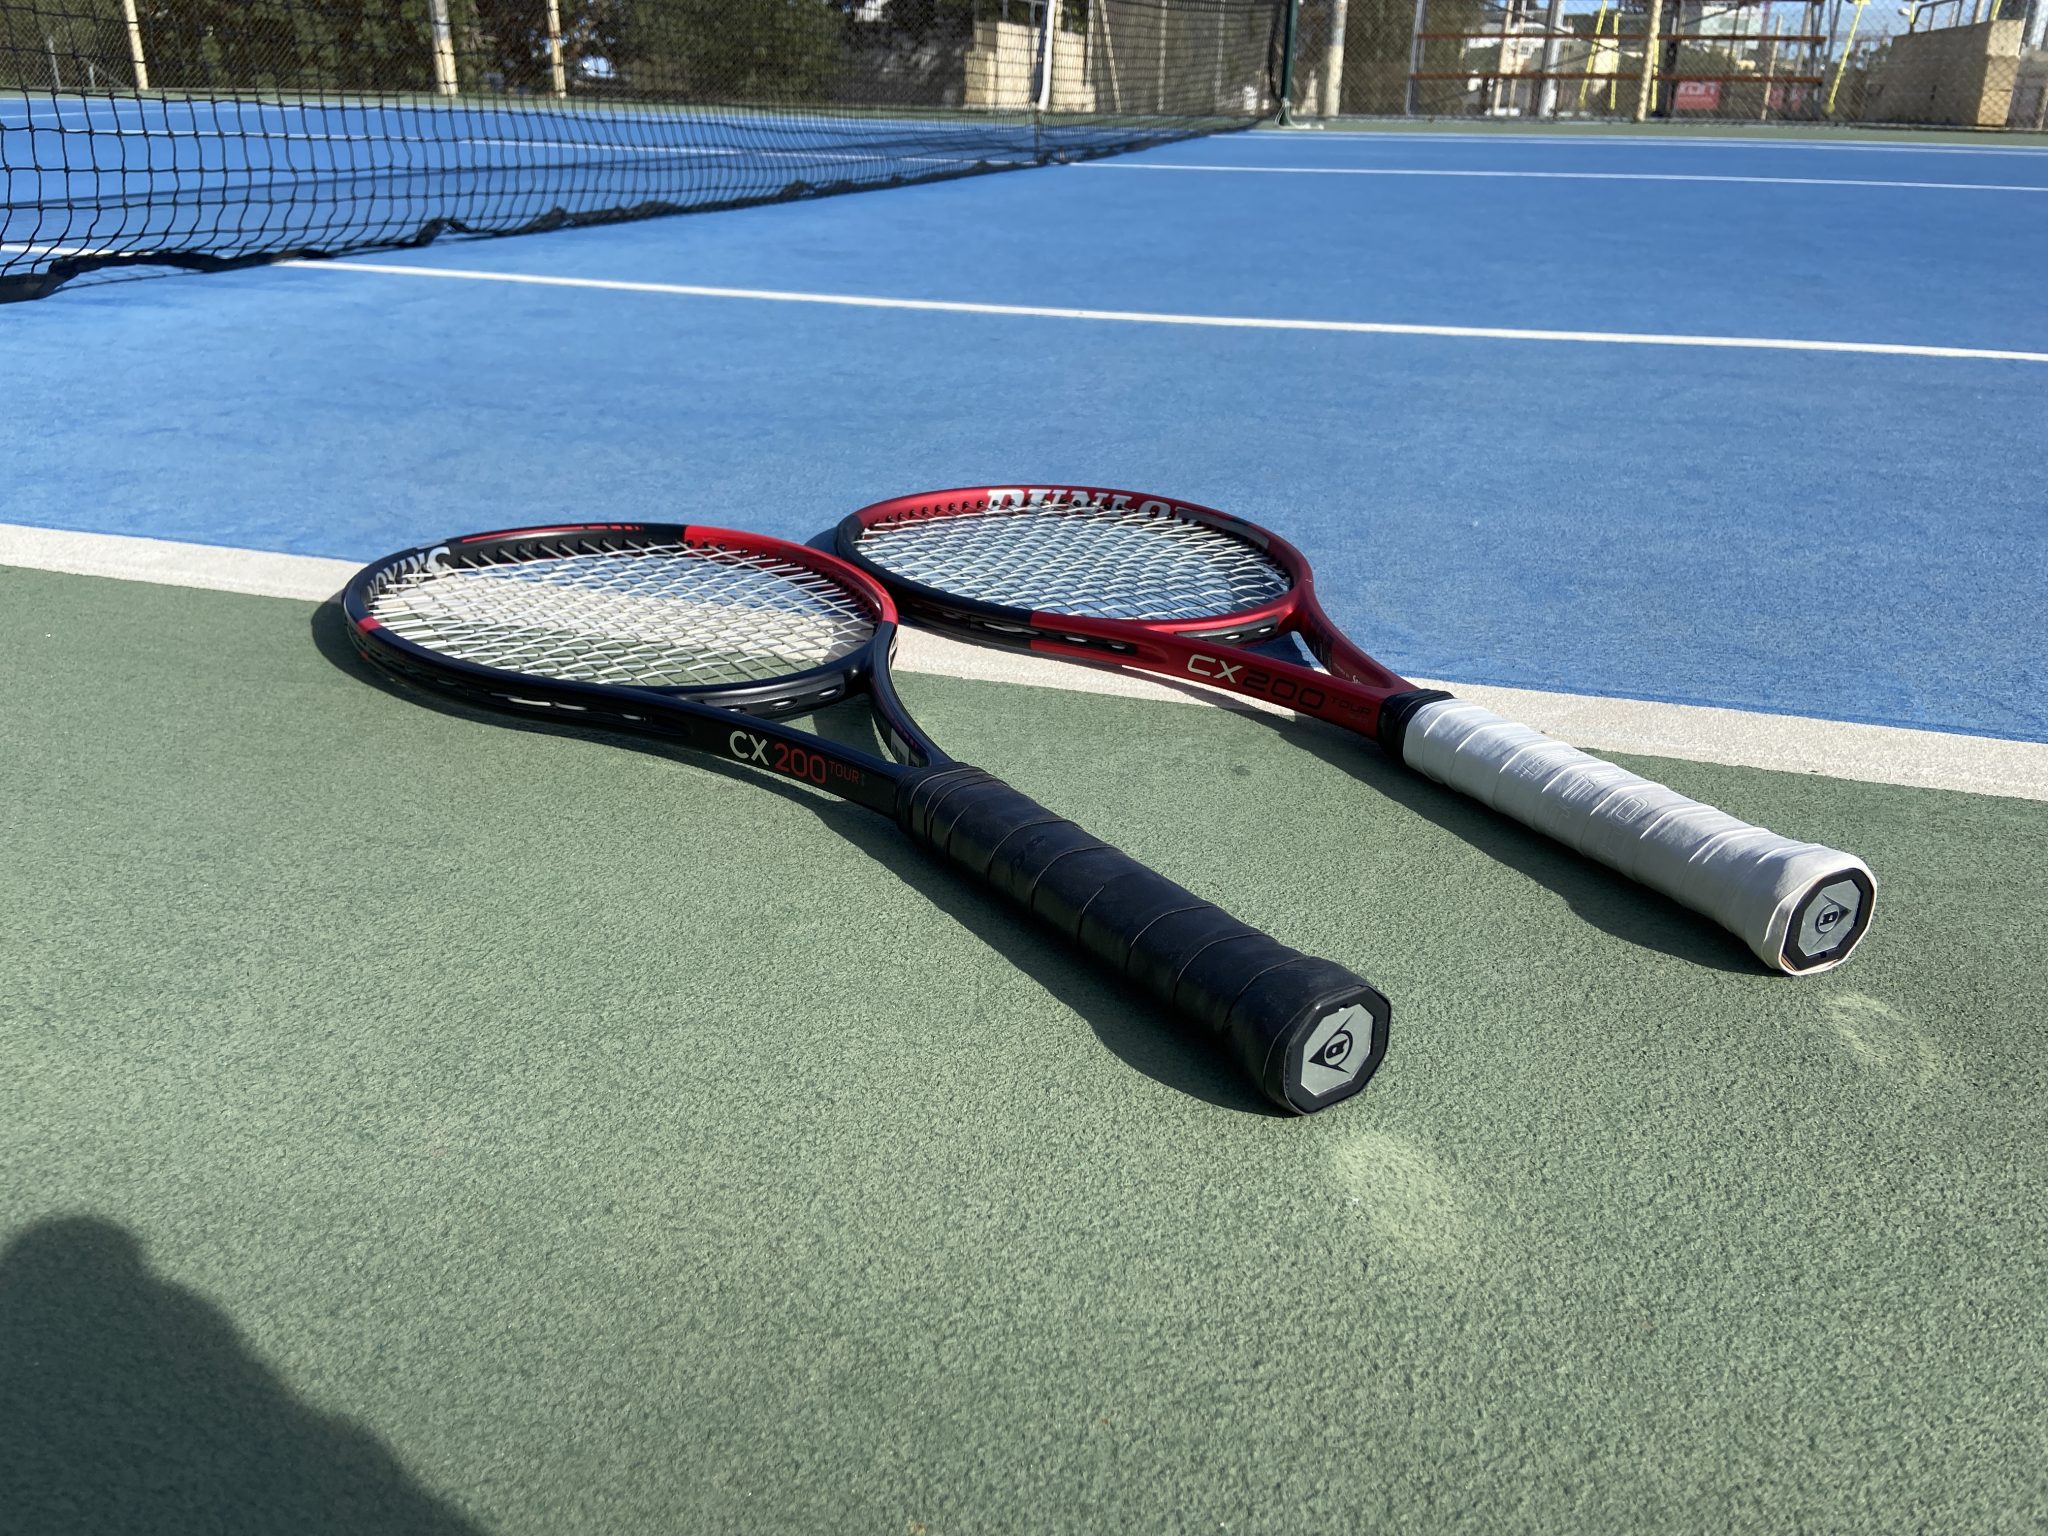 The Best Racquets for Arm Comfort